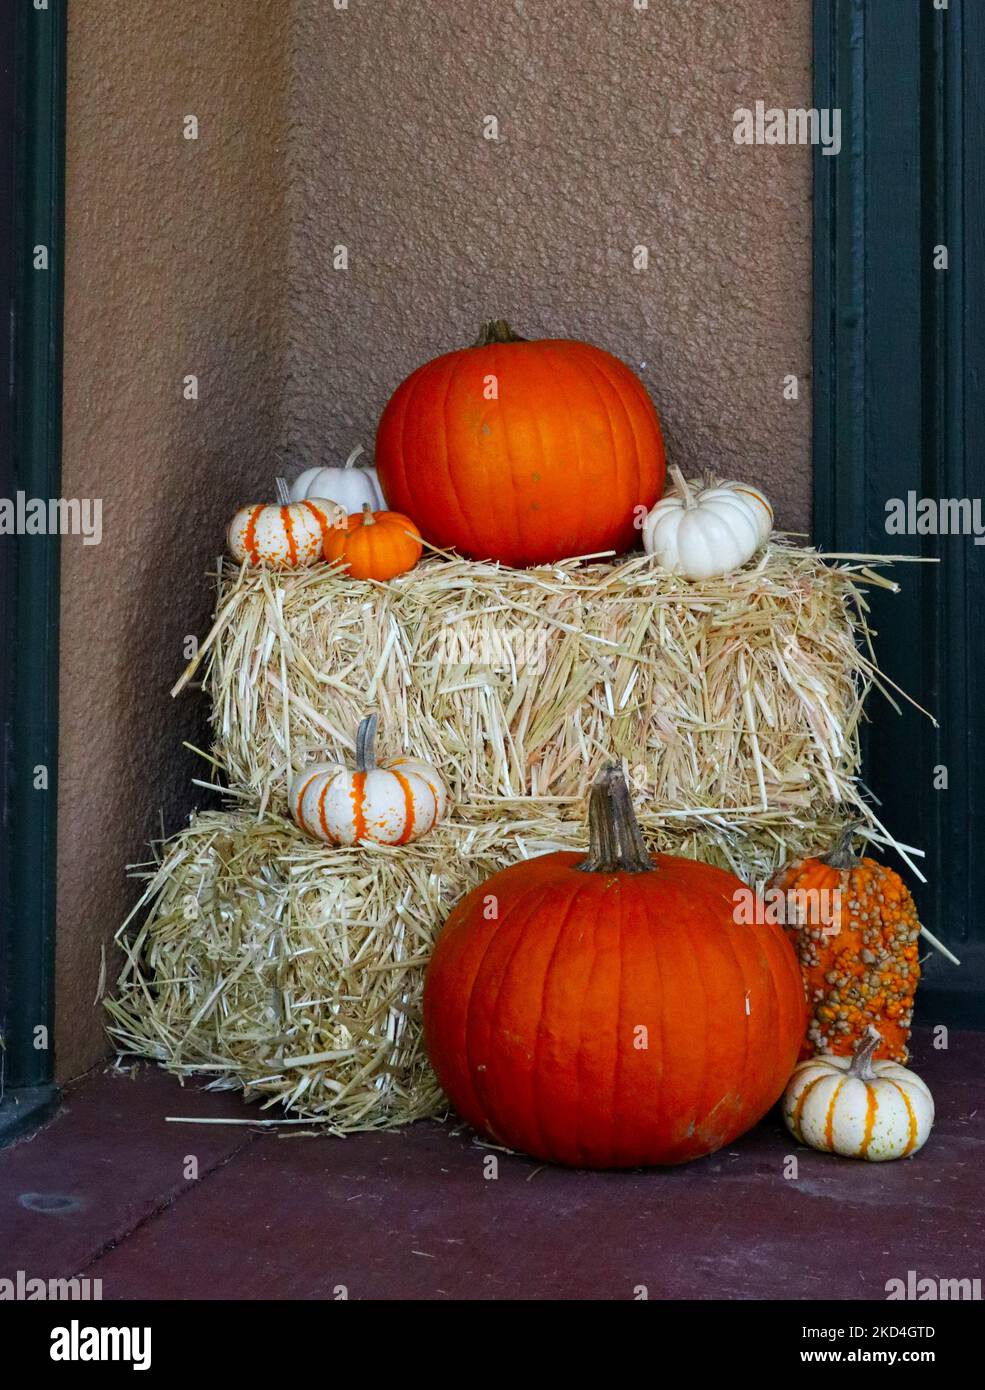 Variety of Pumpkins on Hay Bales - Fall Halloween Decor beside entrance of home Stock Photo